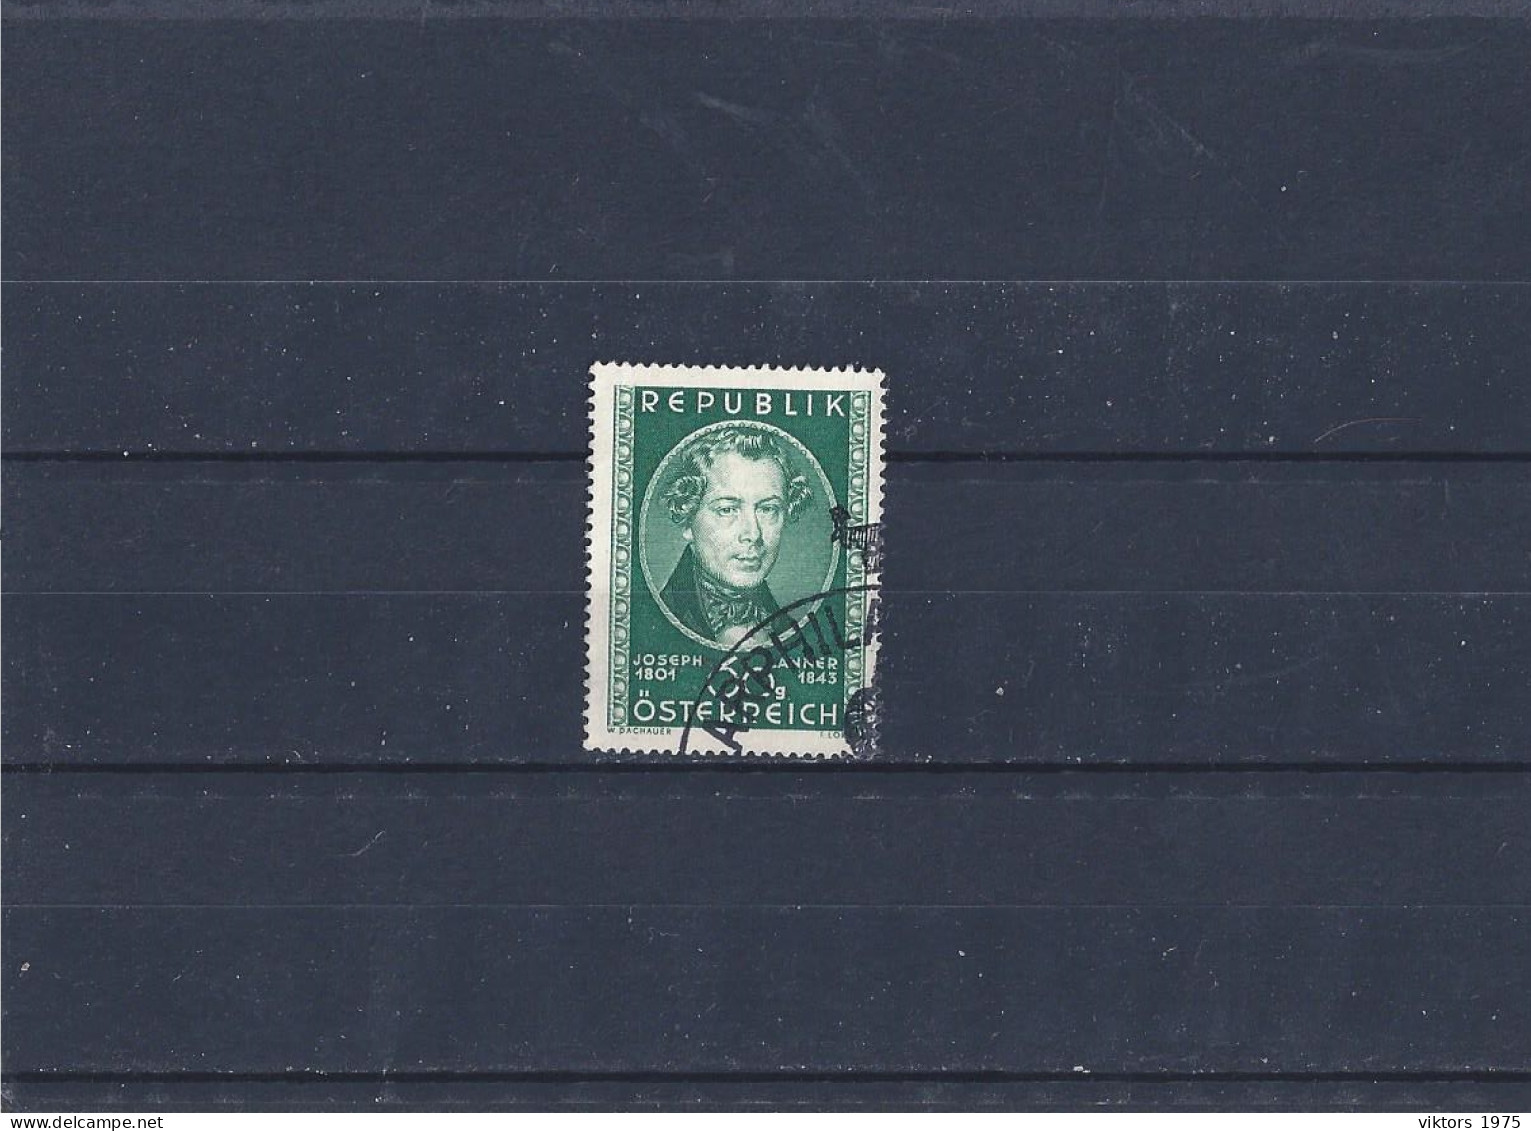 Used Stamp Nr.964 In MICHEL Catalog - Used Stamps